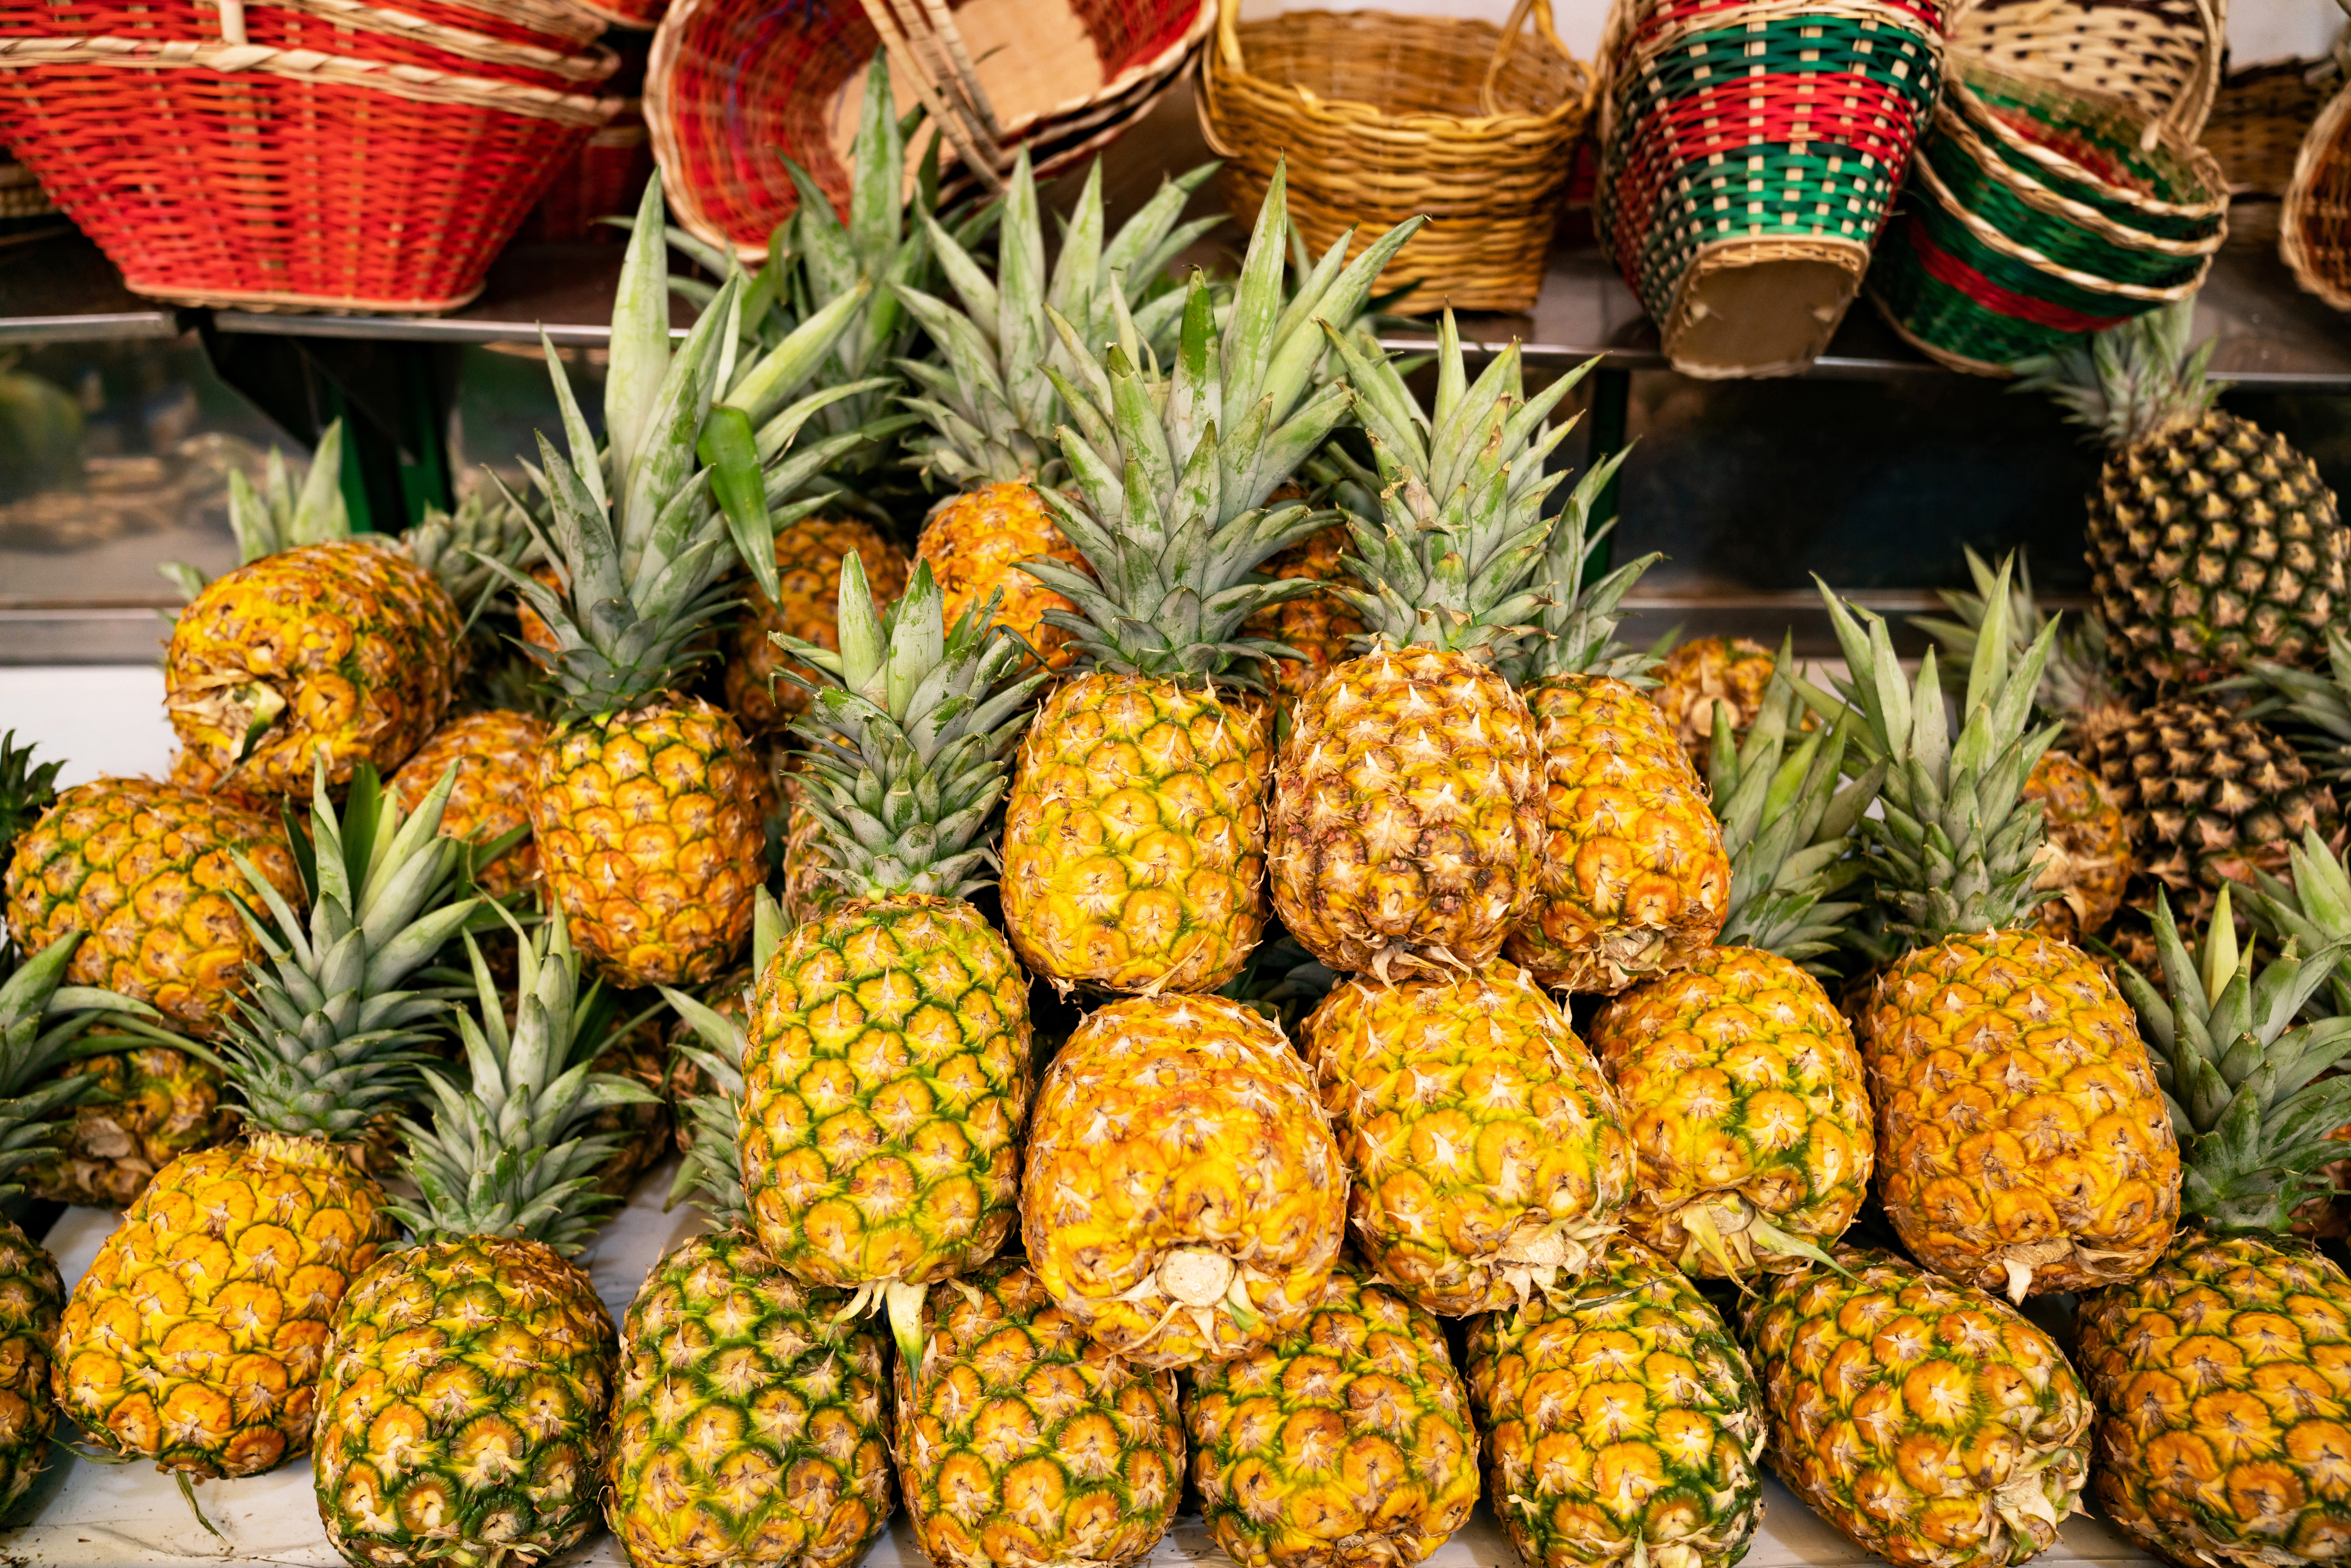 A variety of pineapples are displayed on a market stall. They are stacked in multiple rows with some baskets visible in the background